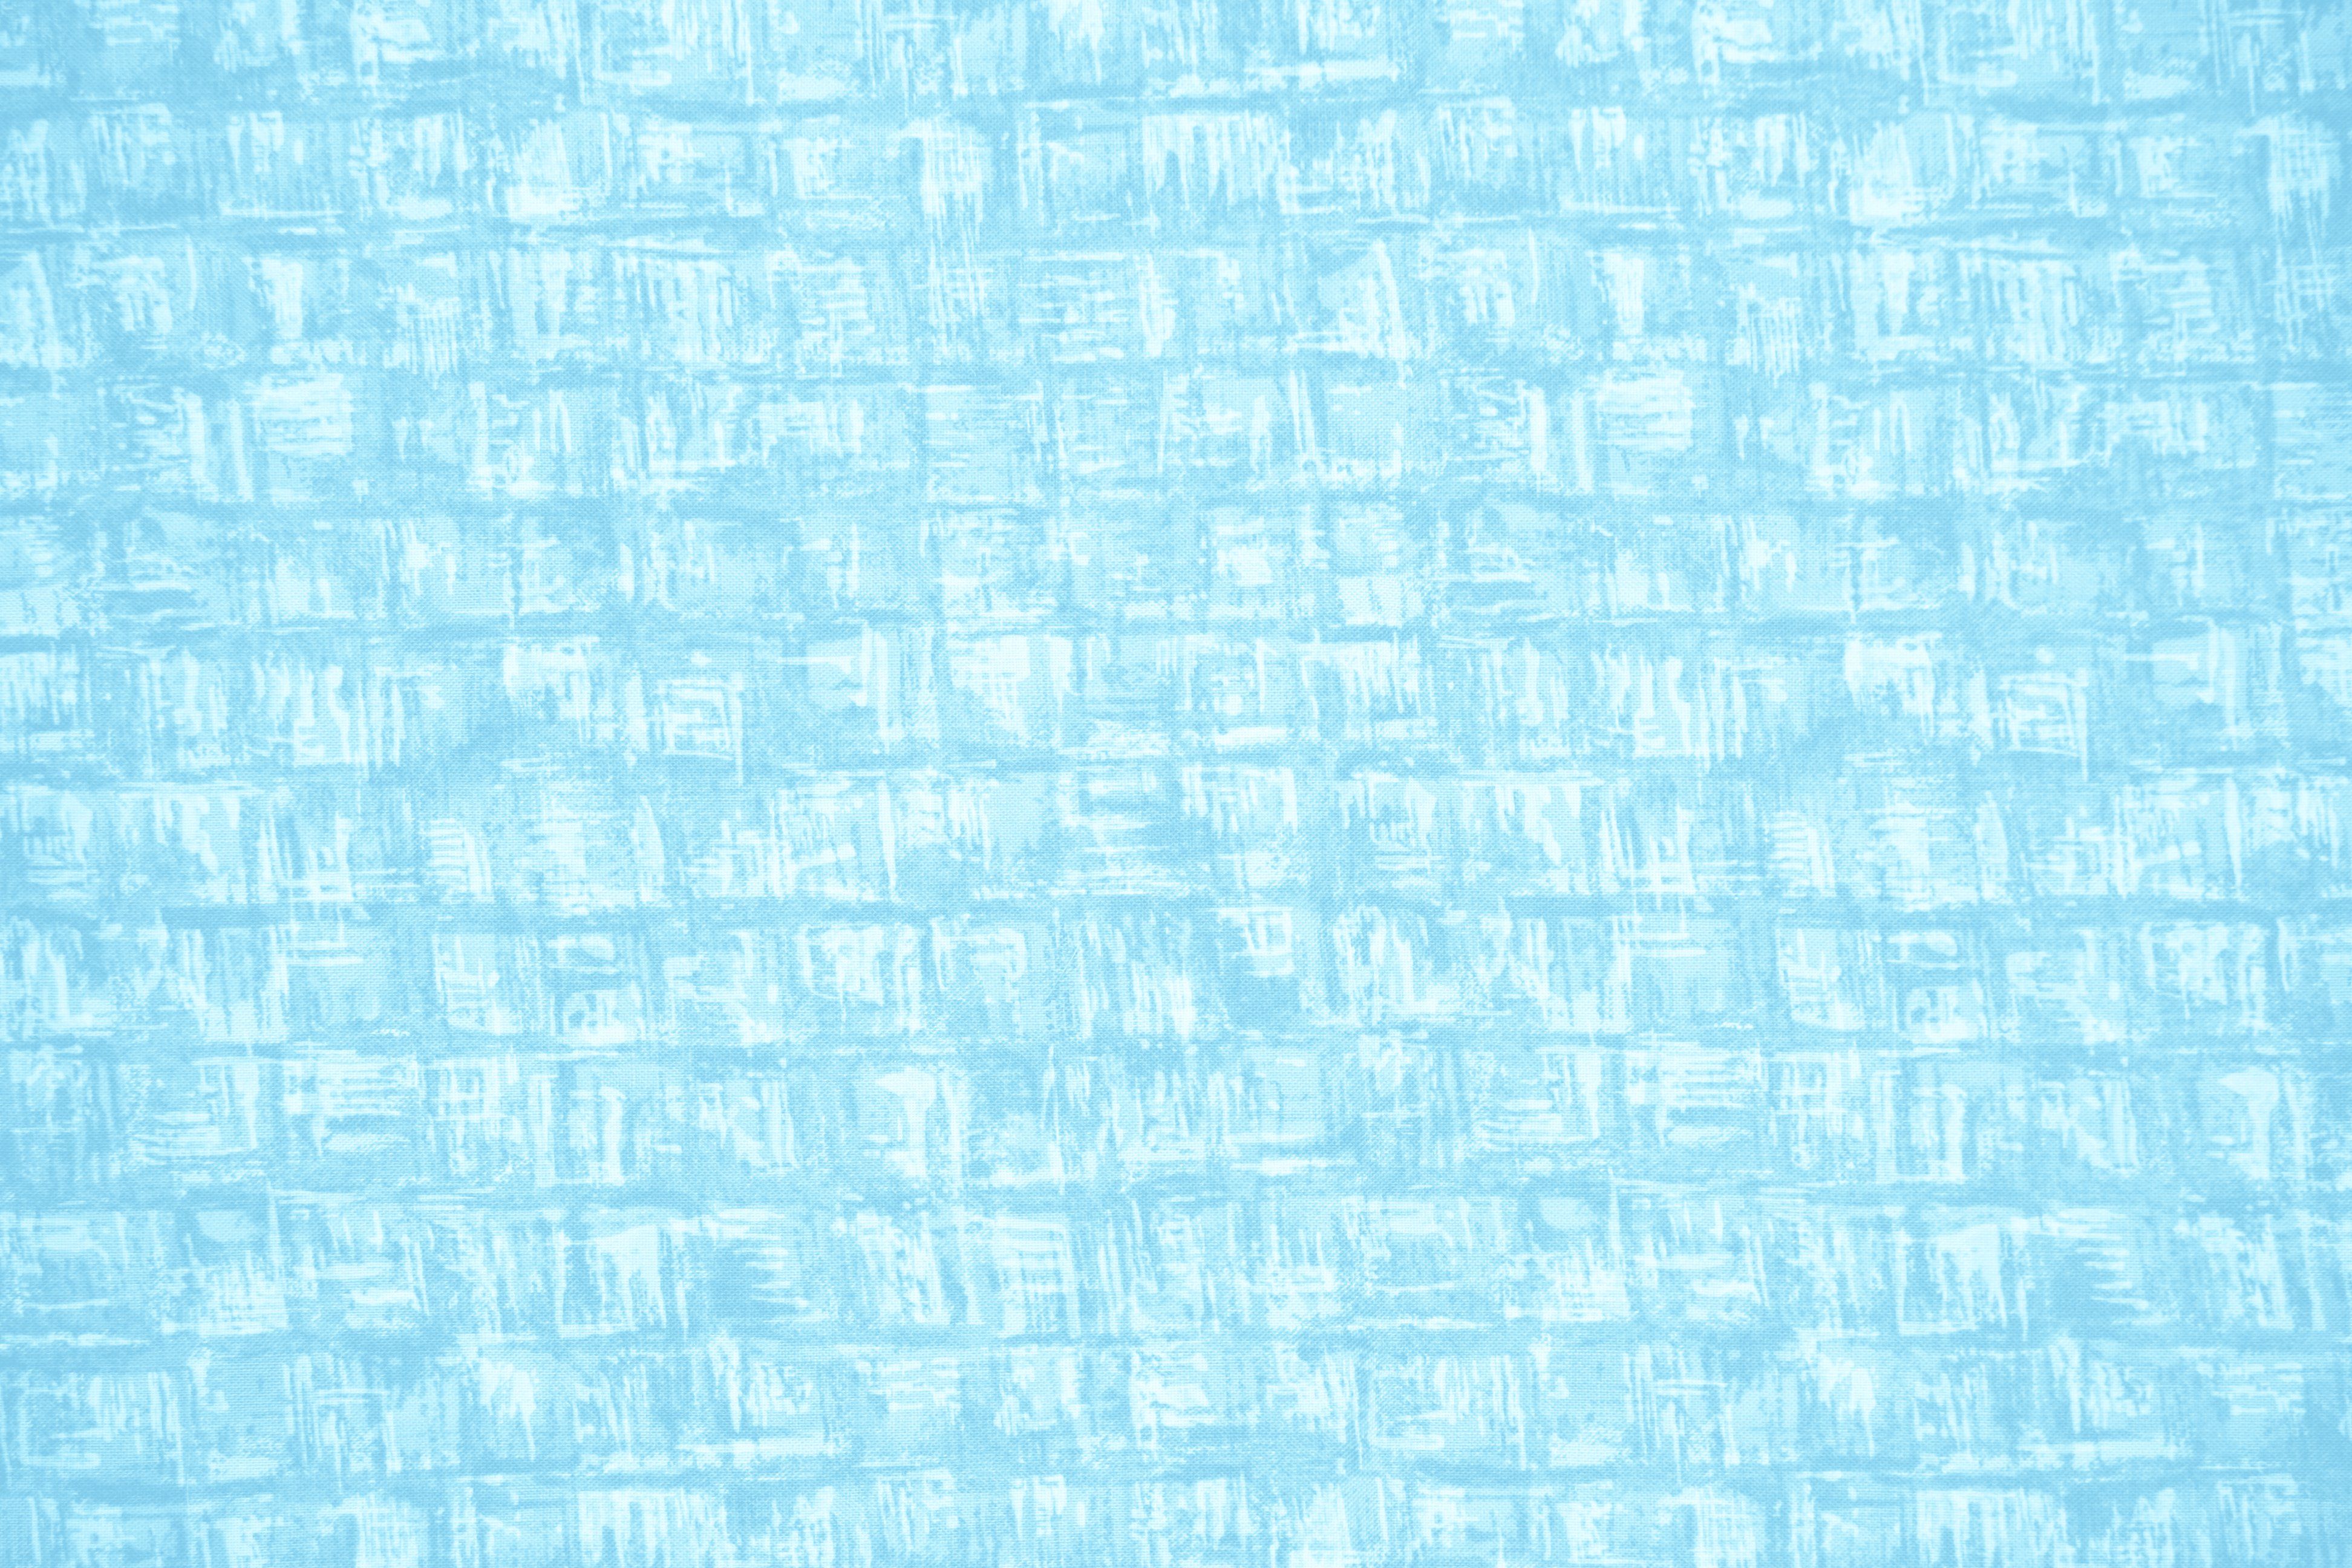 Baby Blue Abstract Squares Fabric Texture Picture. Free Photograph